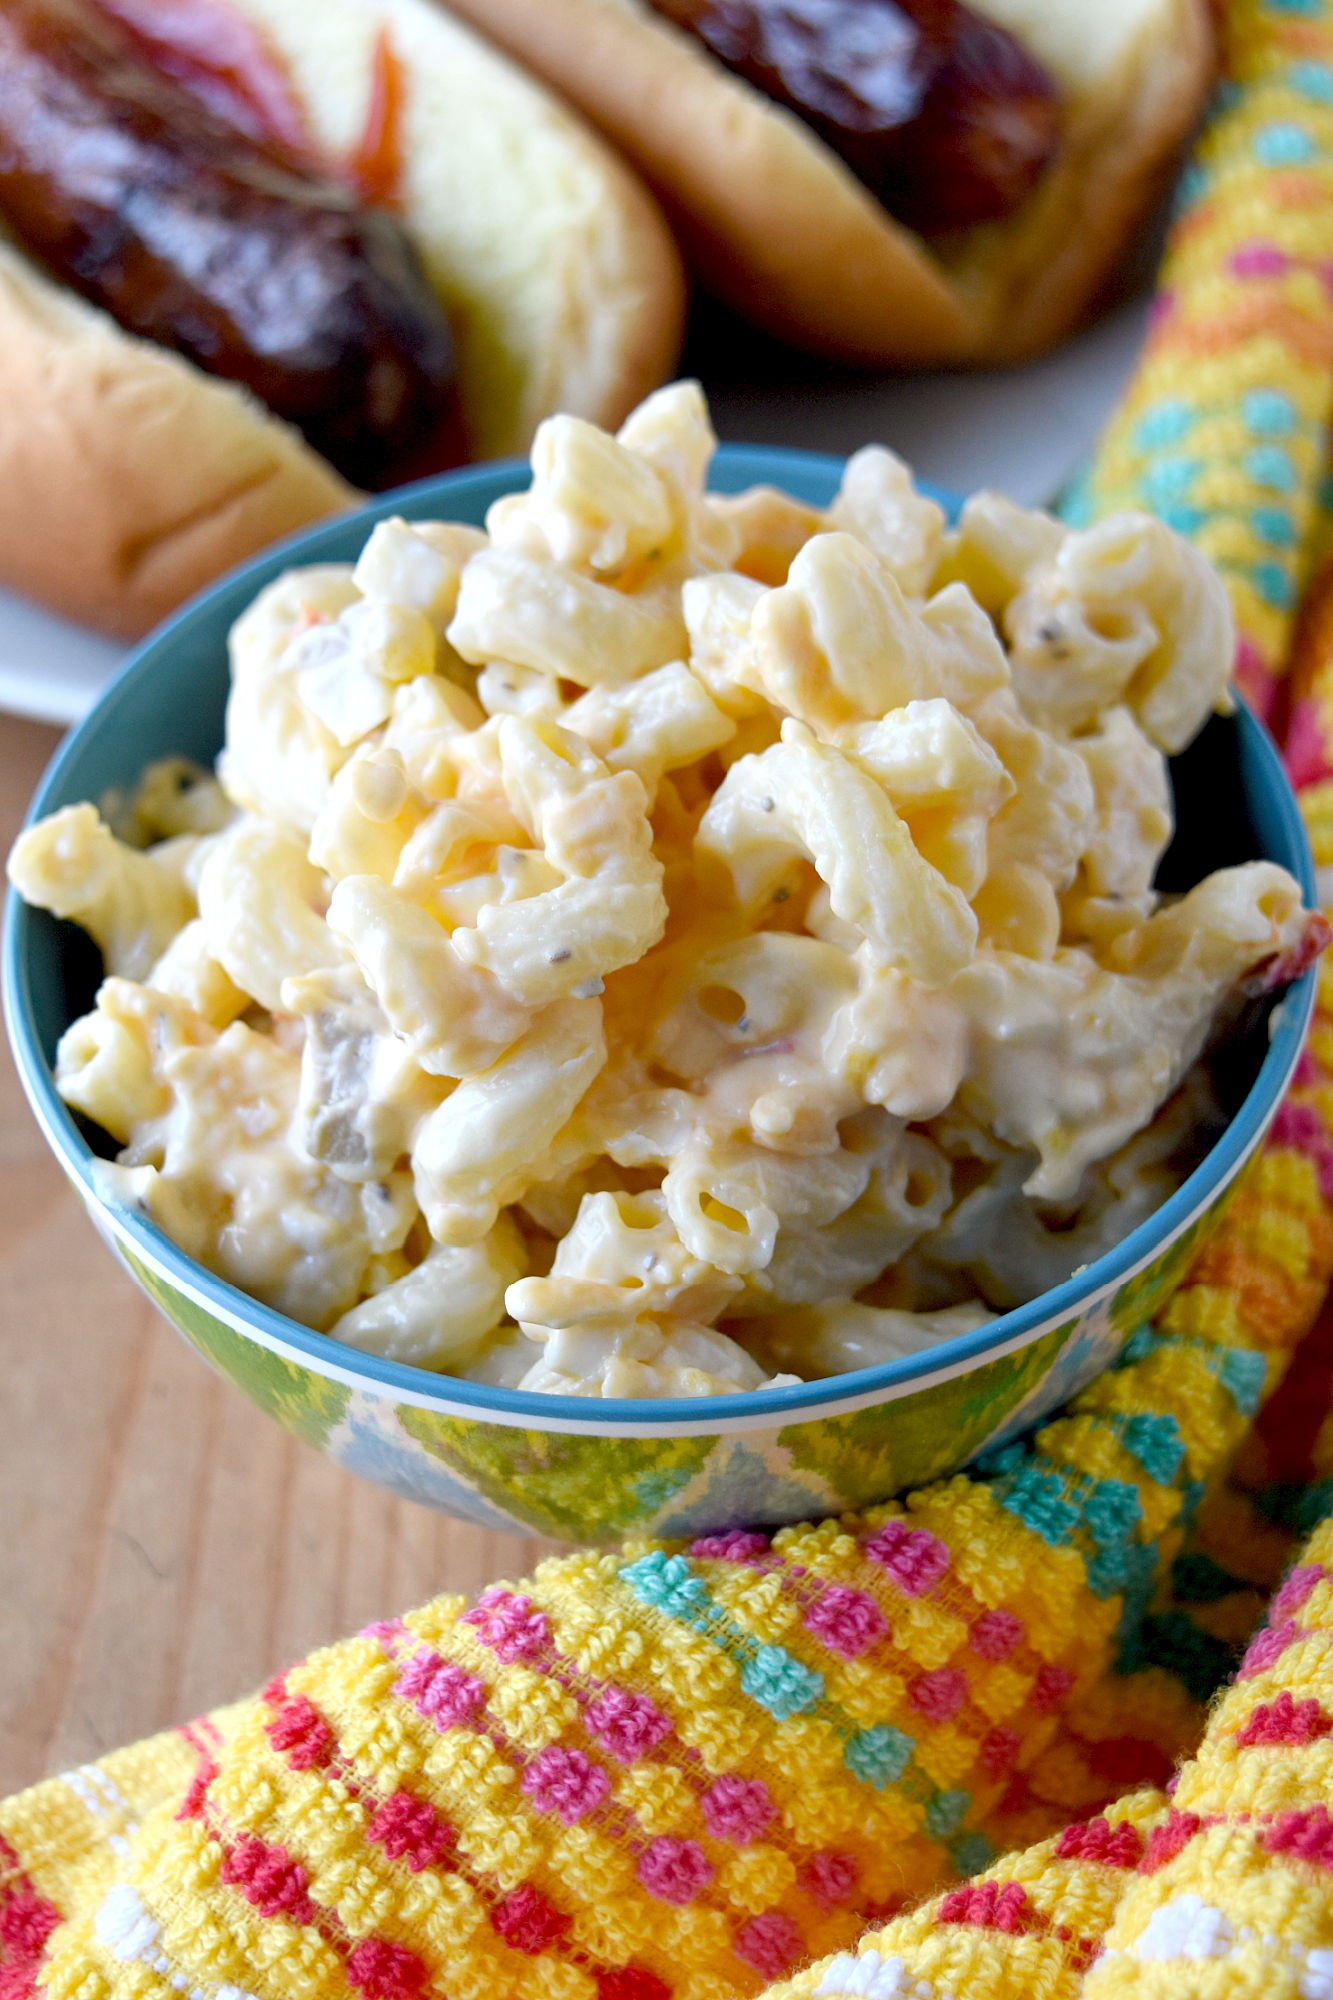 Pimento Cheese Macaroni Salad is a combination of a southern style macaroni salad with egg and pimento cheese spread. The two flavors together are deliciously creamy and cheesy. #OurFamilyTale #pimentocheese #macaronisalad #pimentosalad #sourthernfood #comfortfood